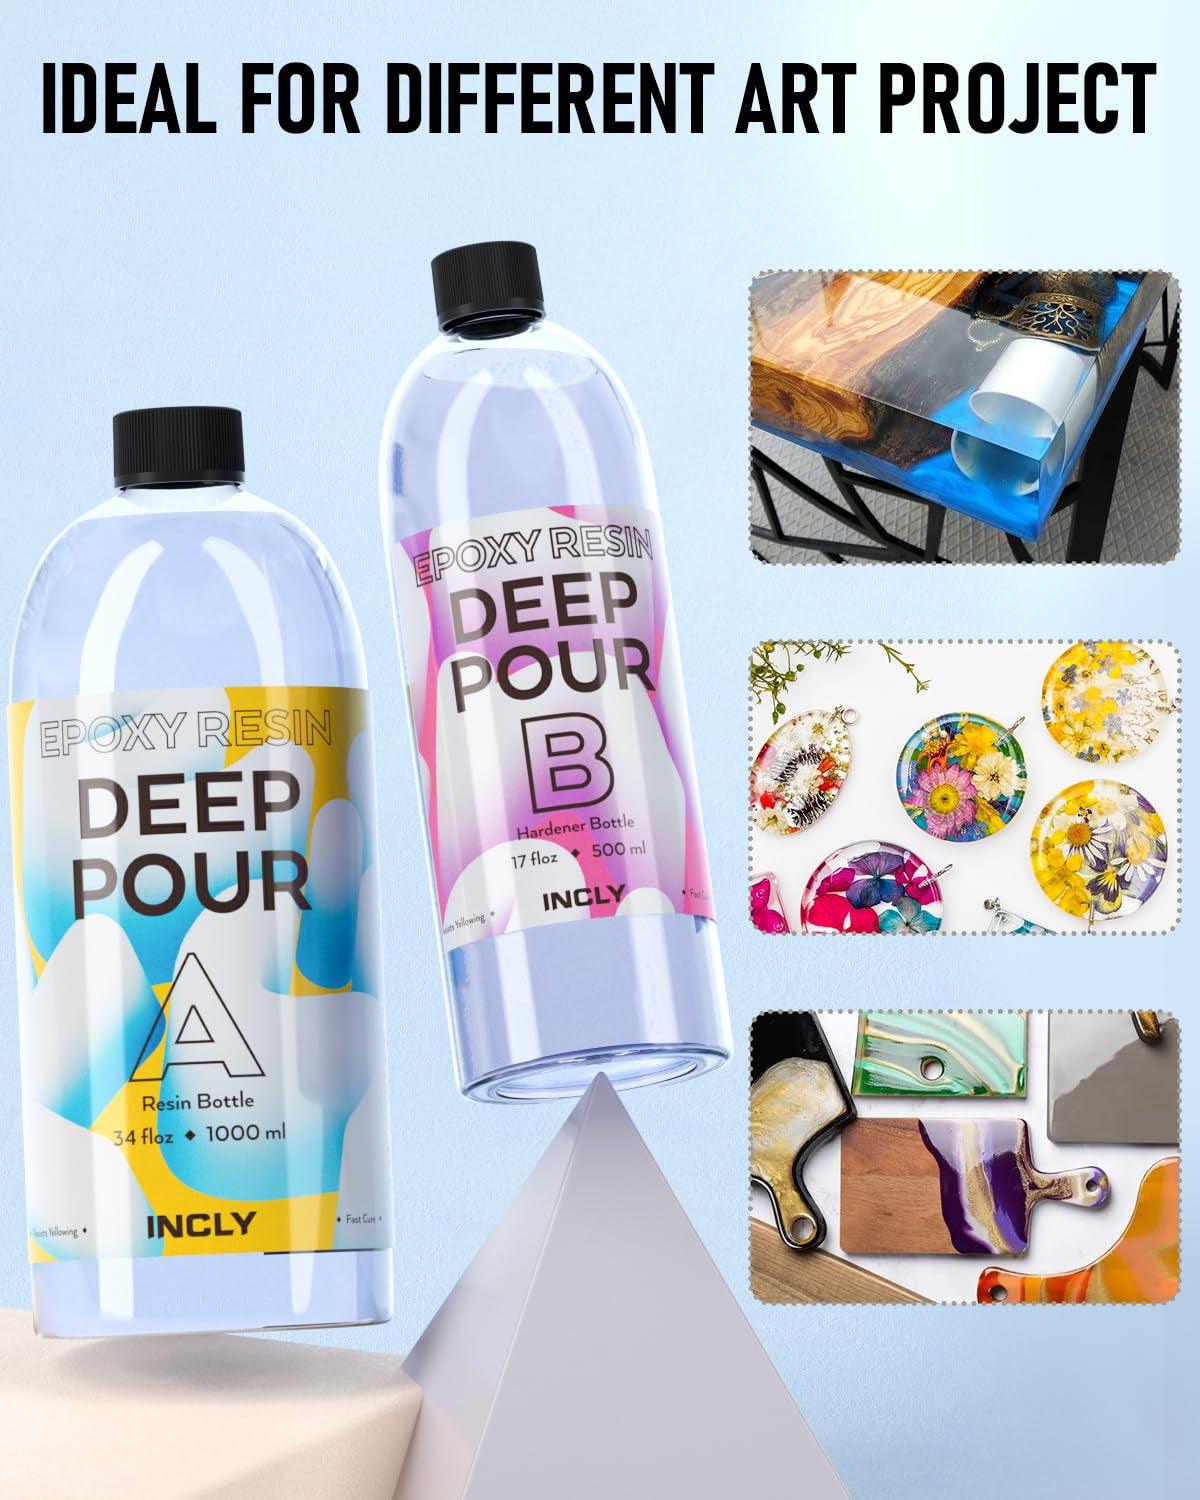 51OZ Deep Pour Epoxy Resin Kit, High Gloss & Bubble Free 2 to 4 Inch Depth Art Resin for Craft River Table, Wood Filler, Bar Top, Coating, Casting, Food Safe Self Leveling Epoxy Resin 2:1 - WoodArtSupply